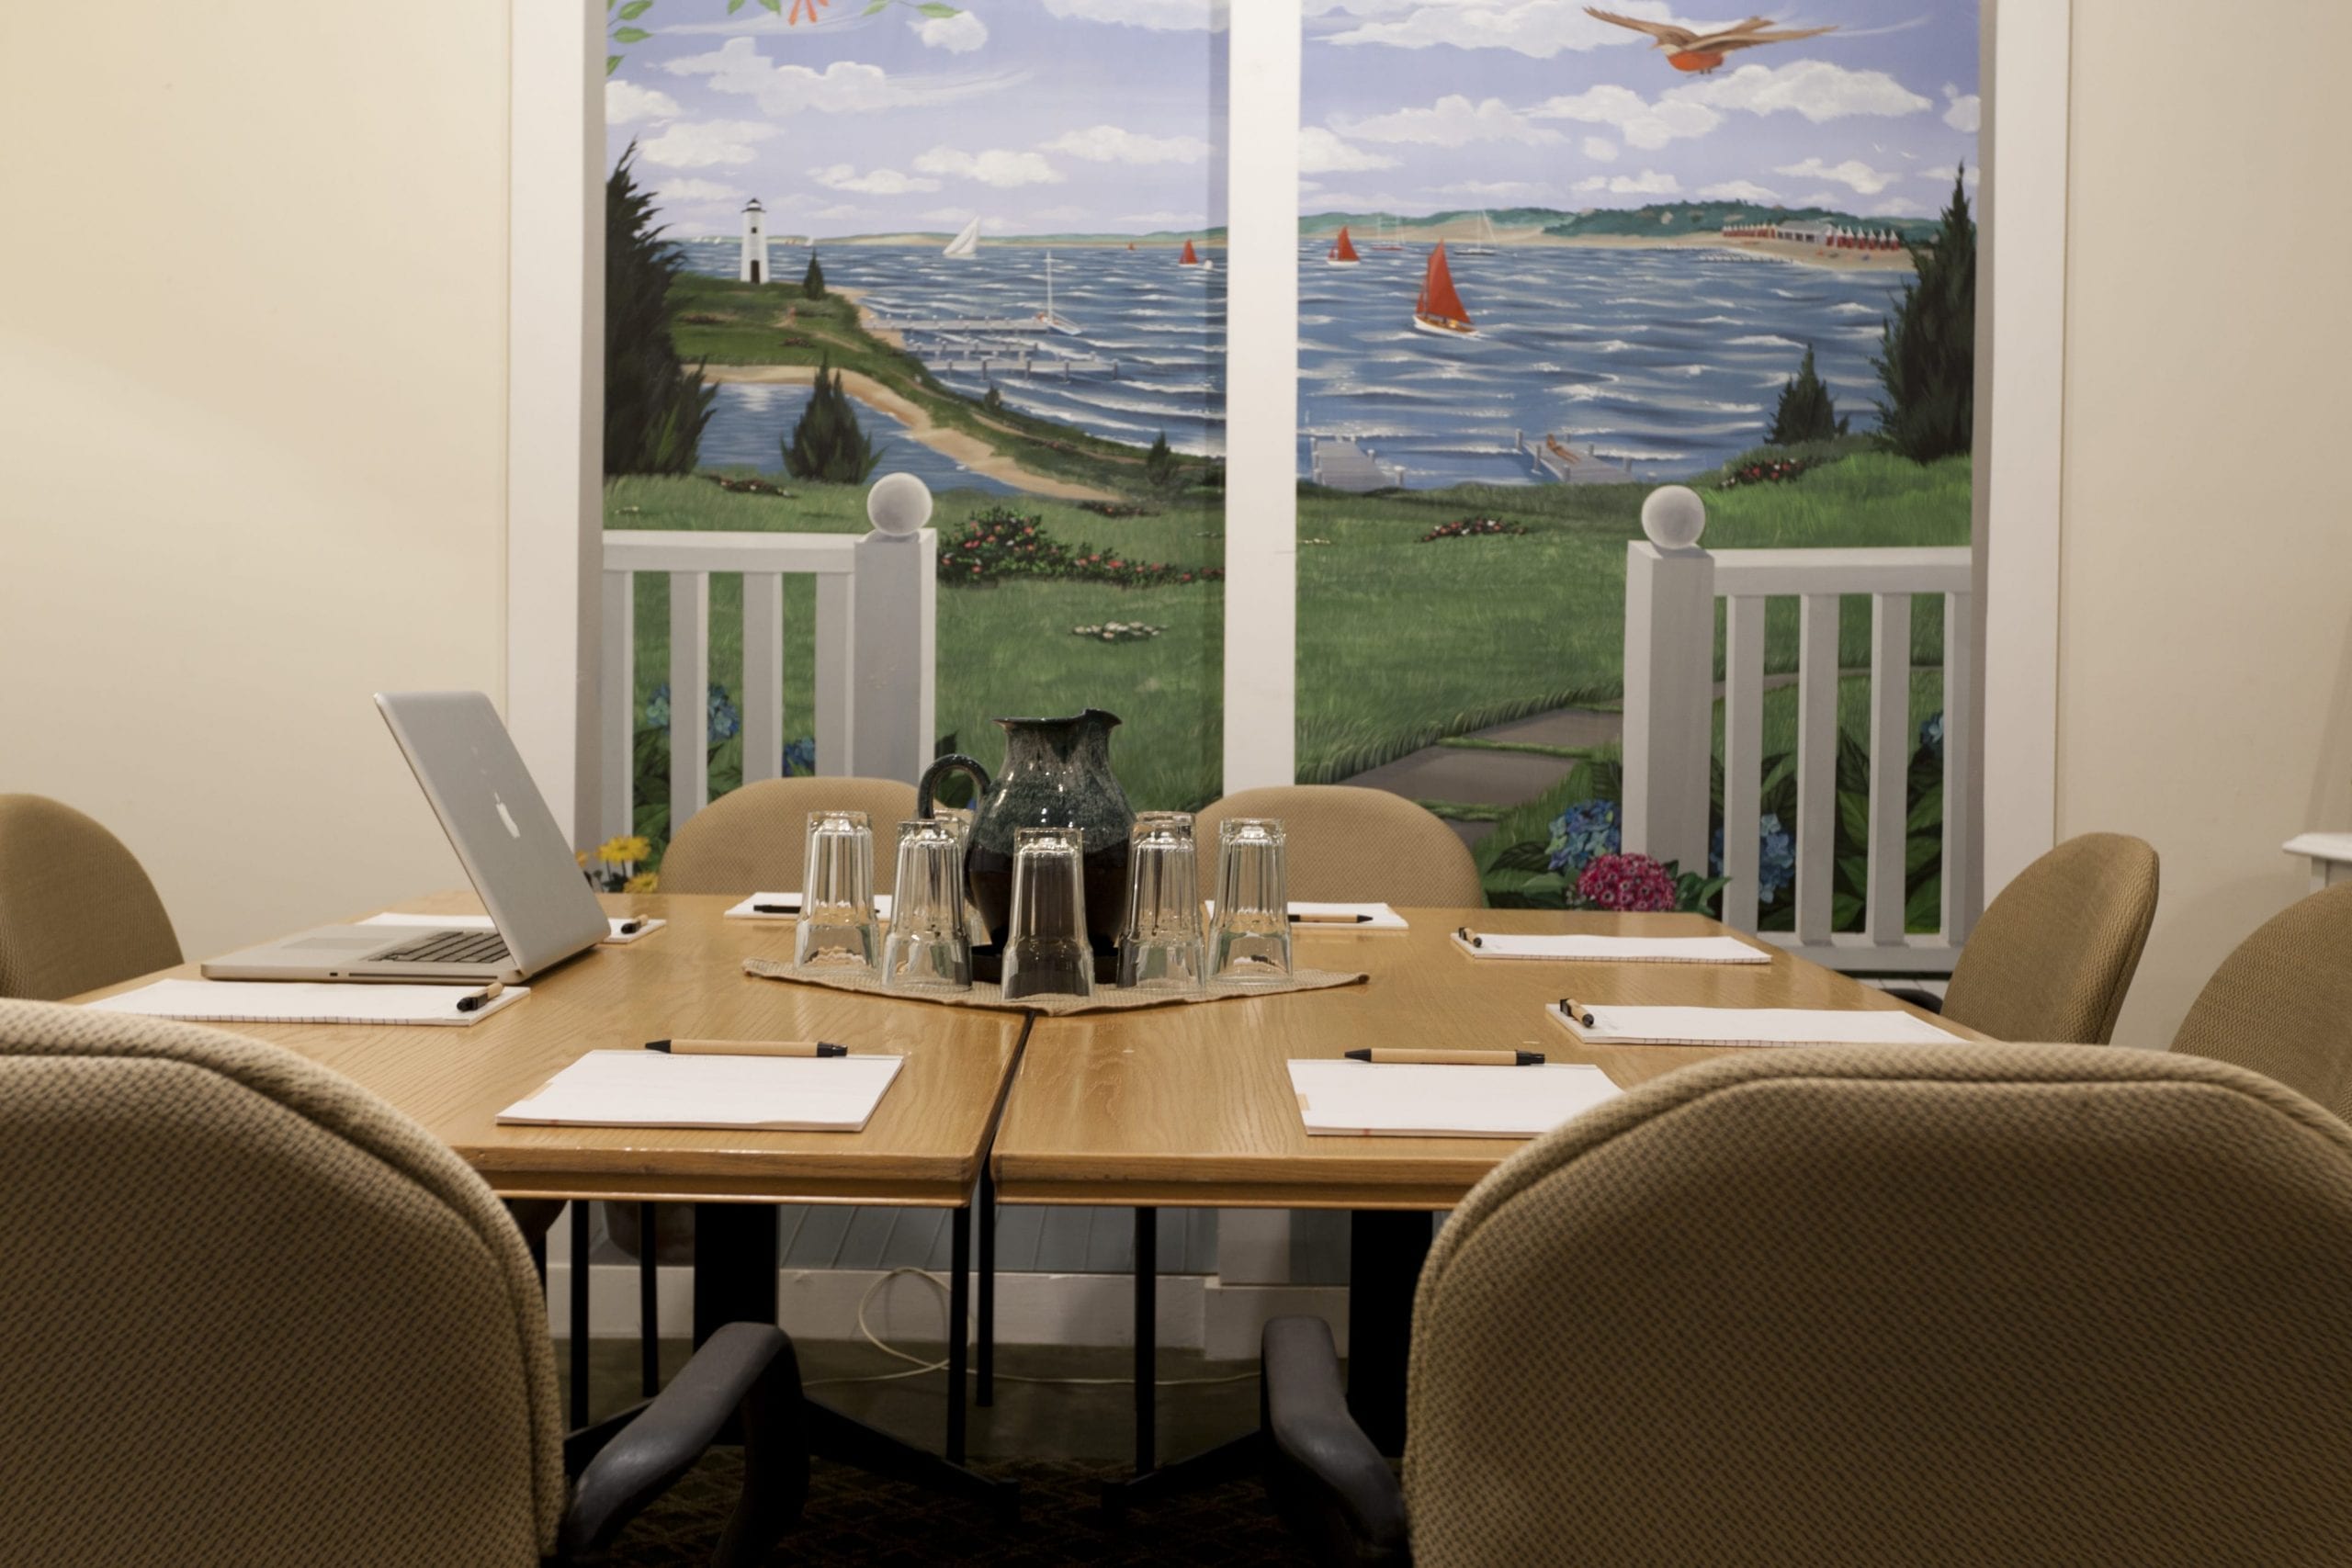 Meeting Space at Vineyard Square, perfect for a small group Martha's Vineyard retreat